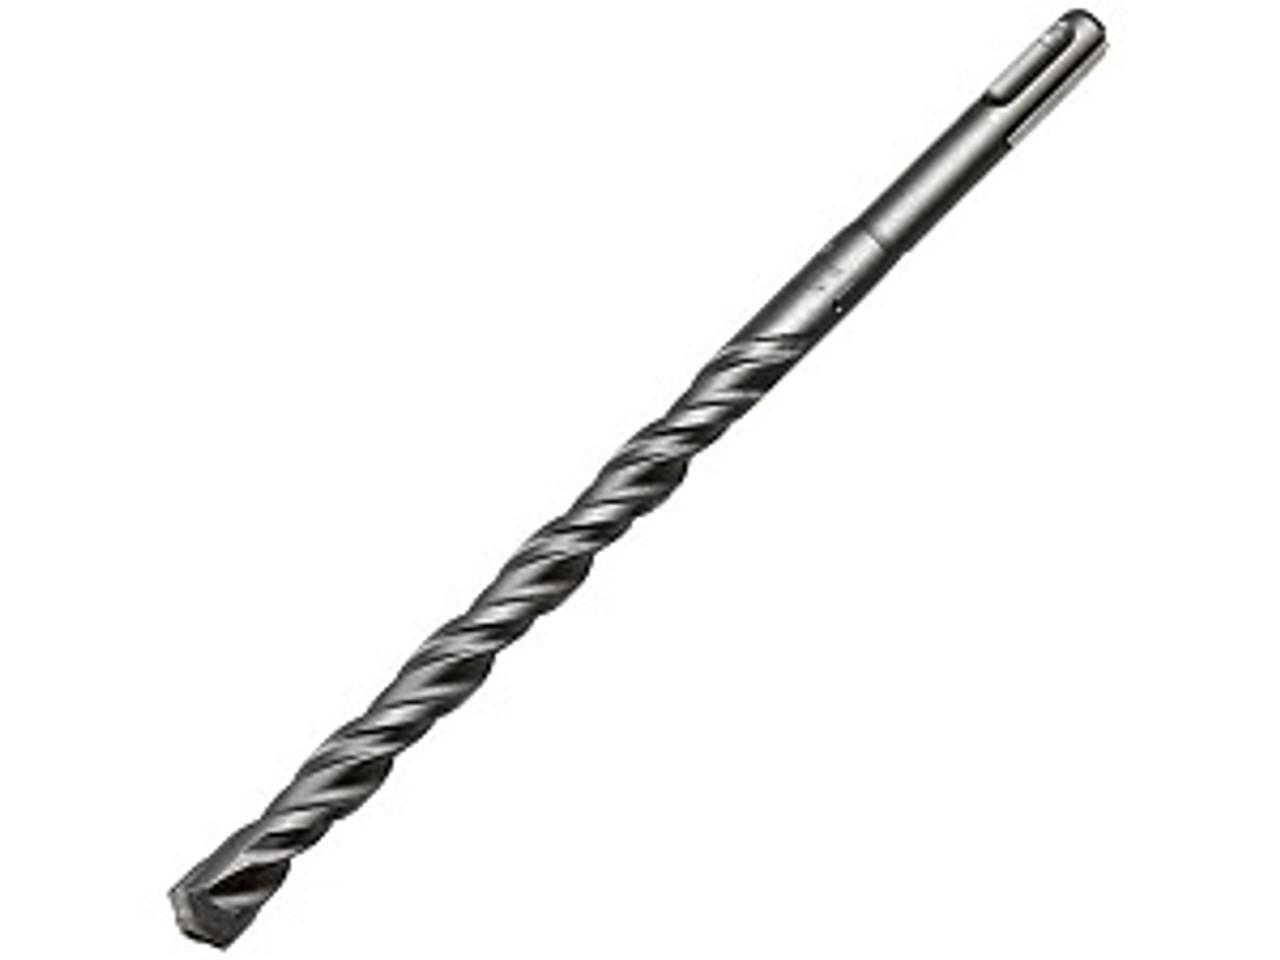 16mm Masonry Drill Bit For Our Concrete Fixings